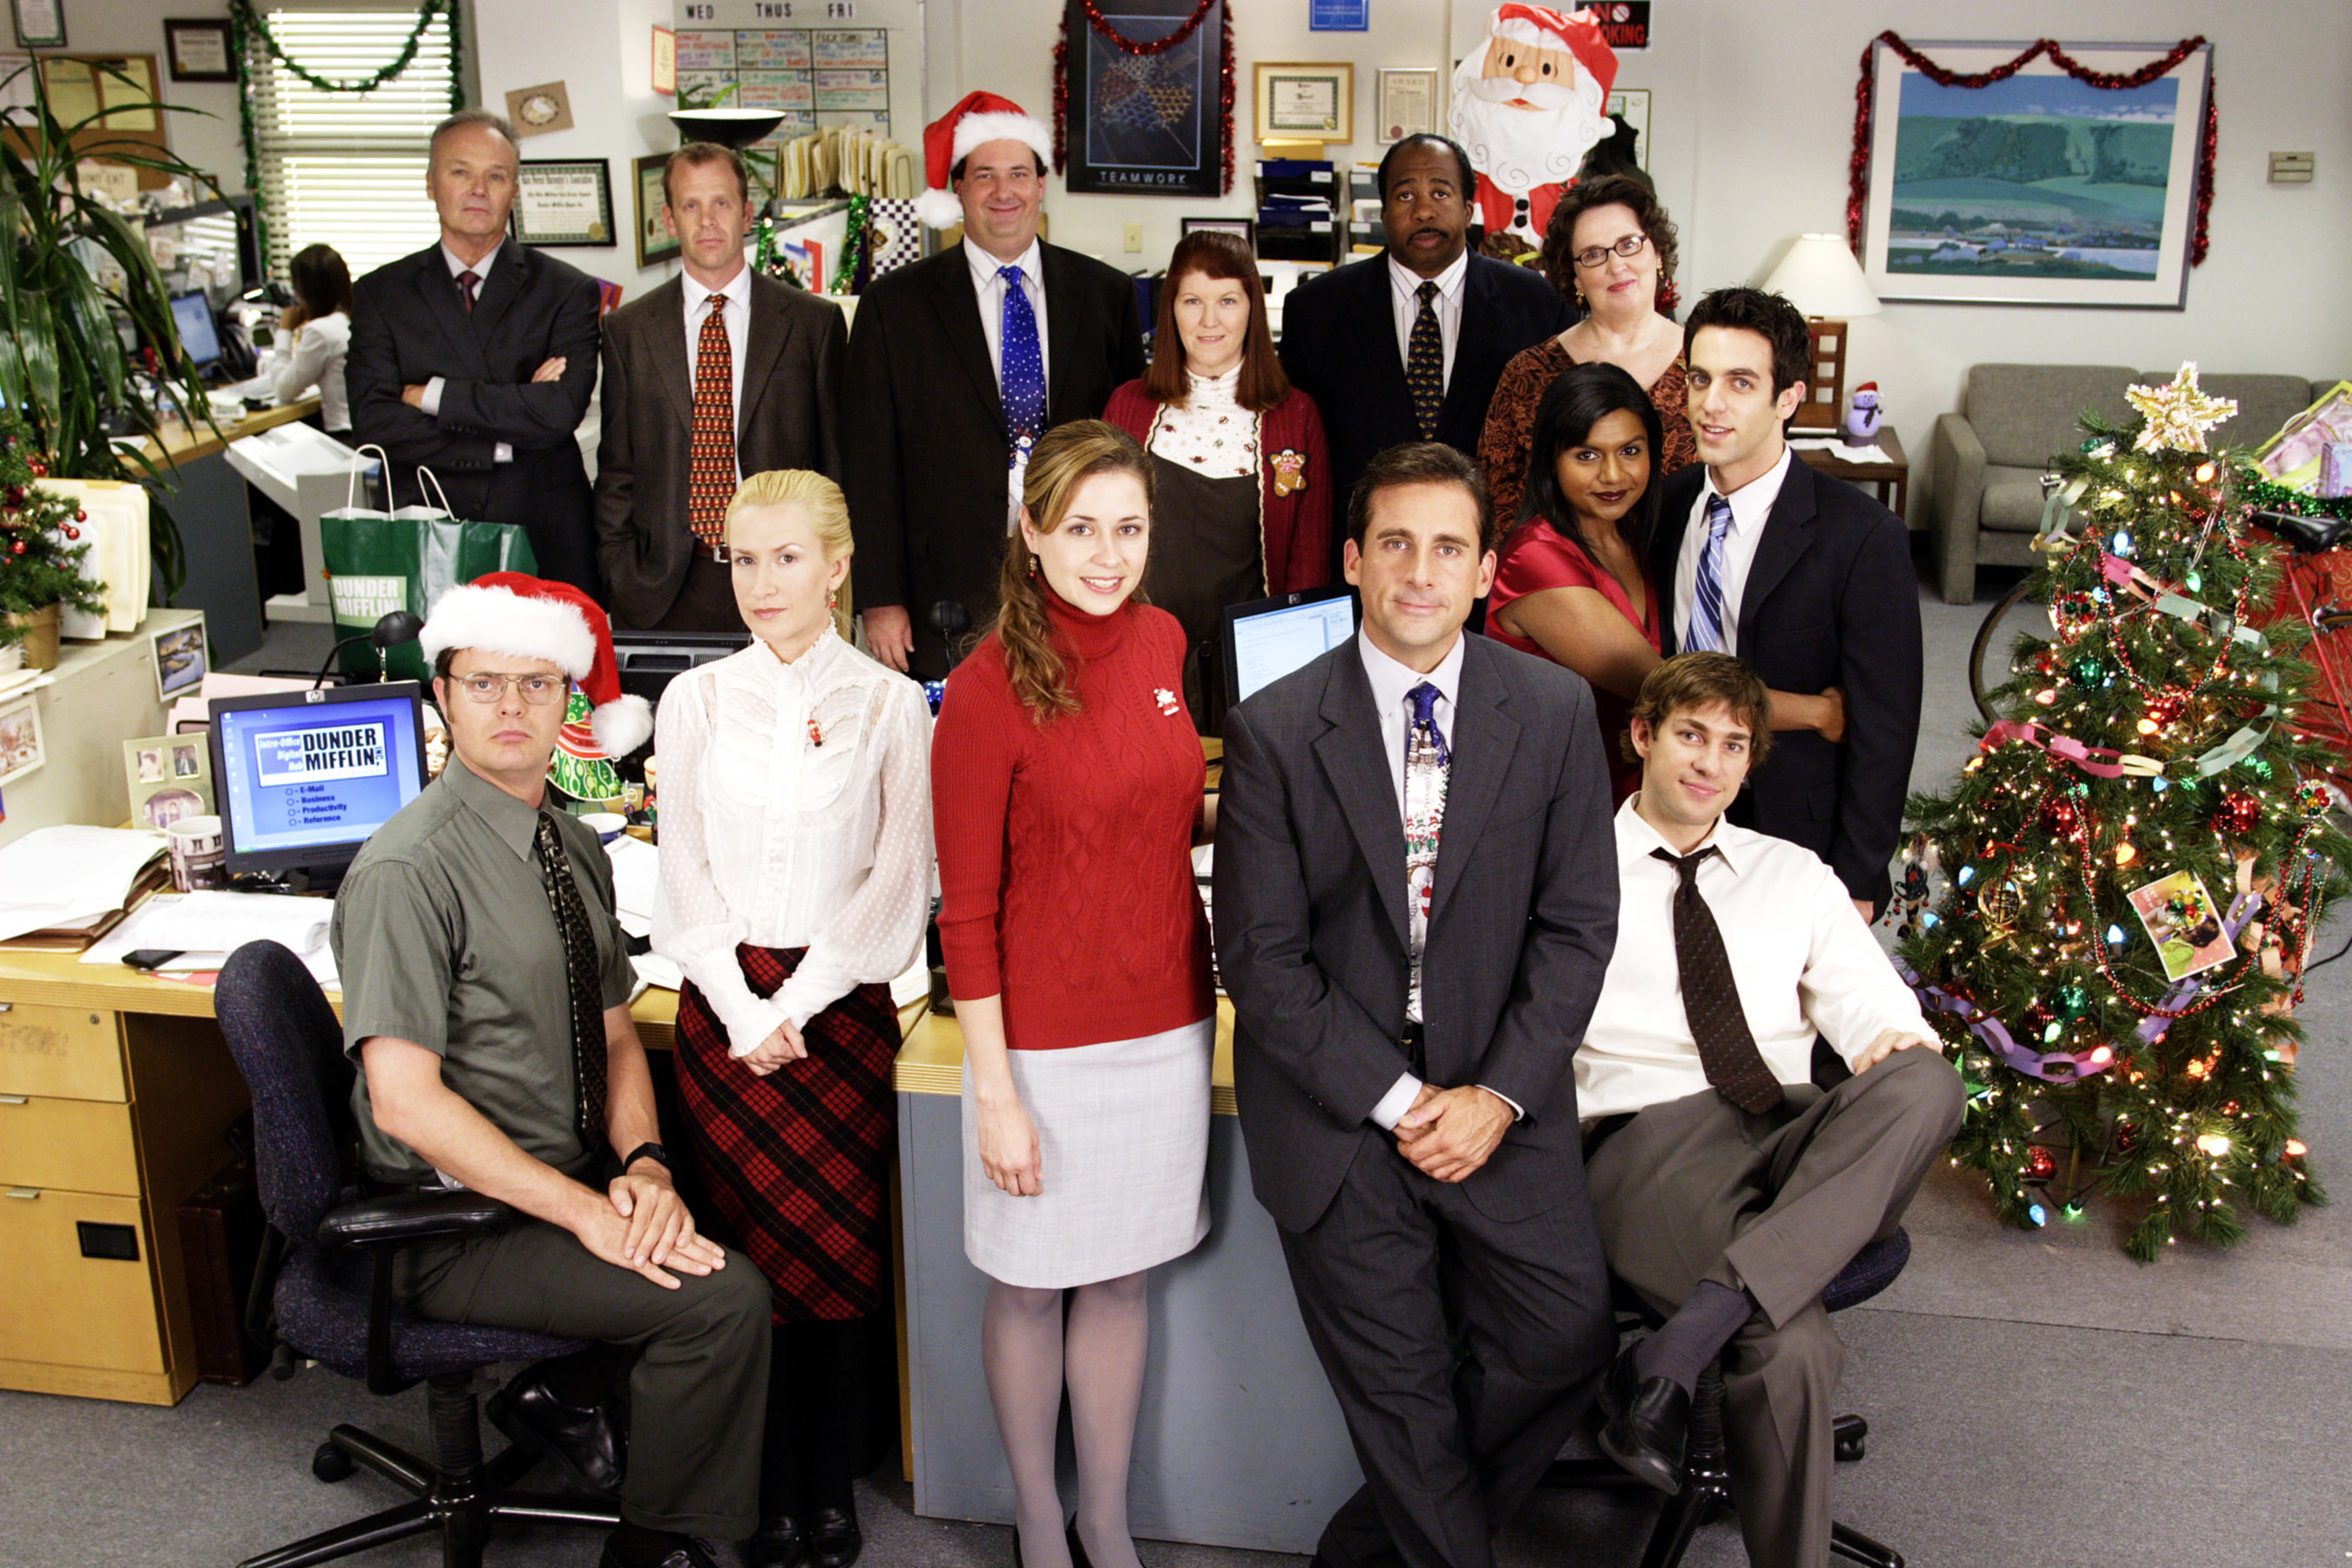 Office staff in festive attire pose for a holiday photo in a decorated workspace